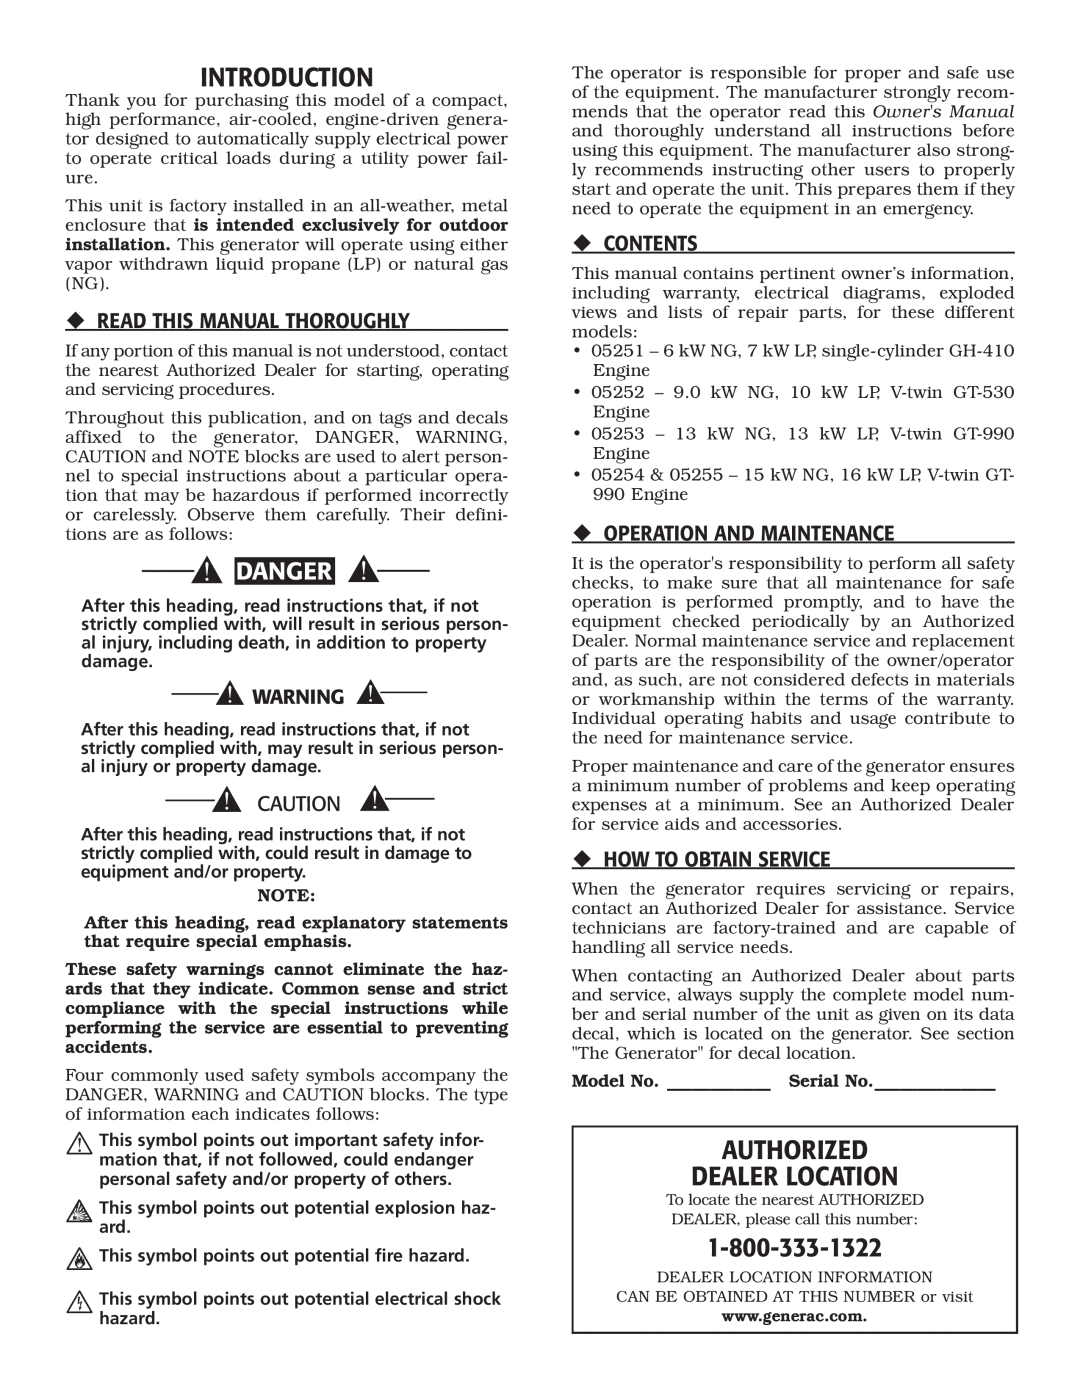 Generac Power Systems 5251 Introduction, Authorized Dealer Location, Danger, ‹ Read This Manual Thoroughly, ‹ Contents 